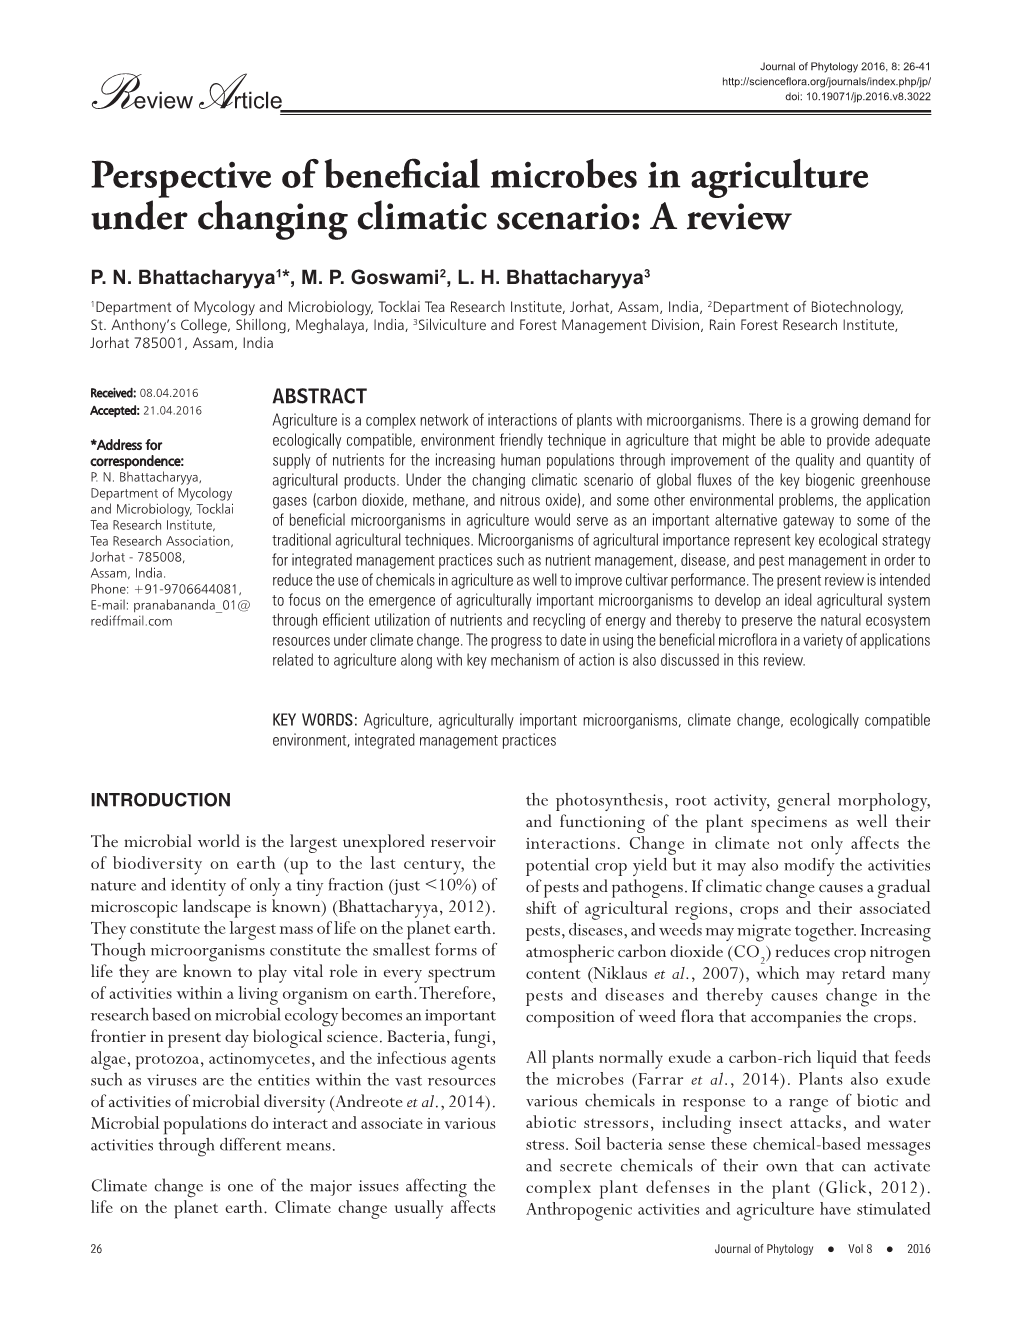 Perspective of Beneficial Microbes in Agriculture Under Changing Climatic